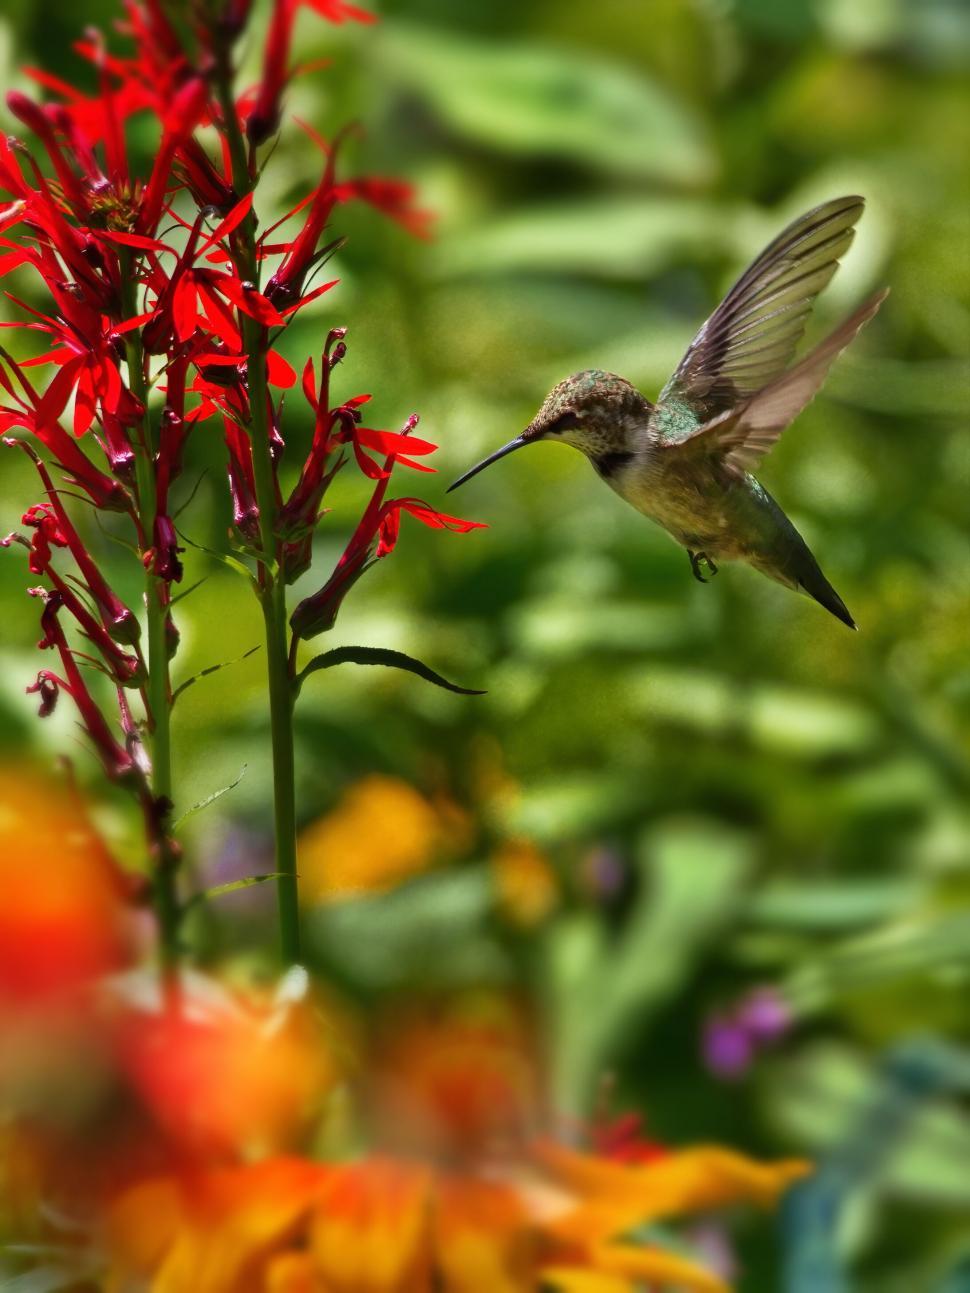 Free Image of Hummingbird in mid-flight approaching red flowers 